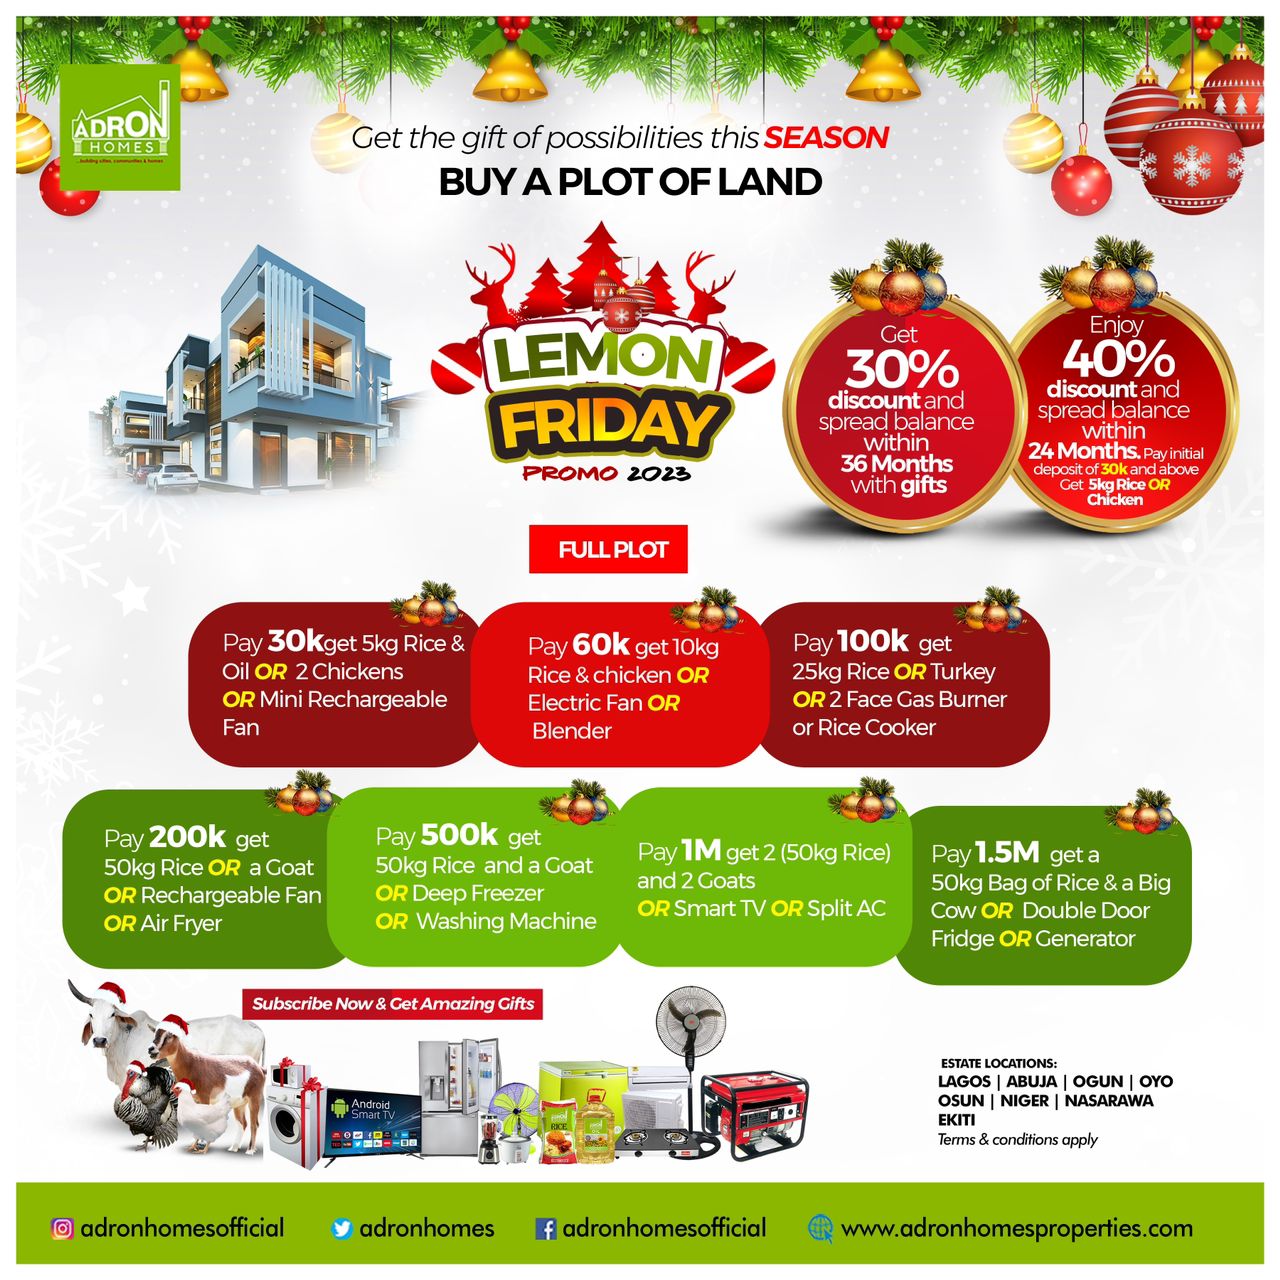 Adron Properties Excites Clients with ‘Lemon Friday Promo’